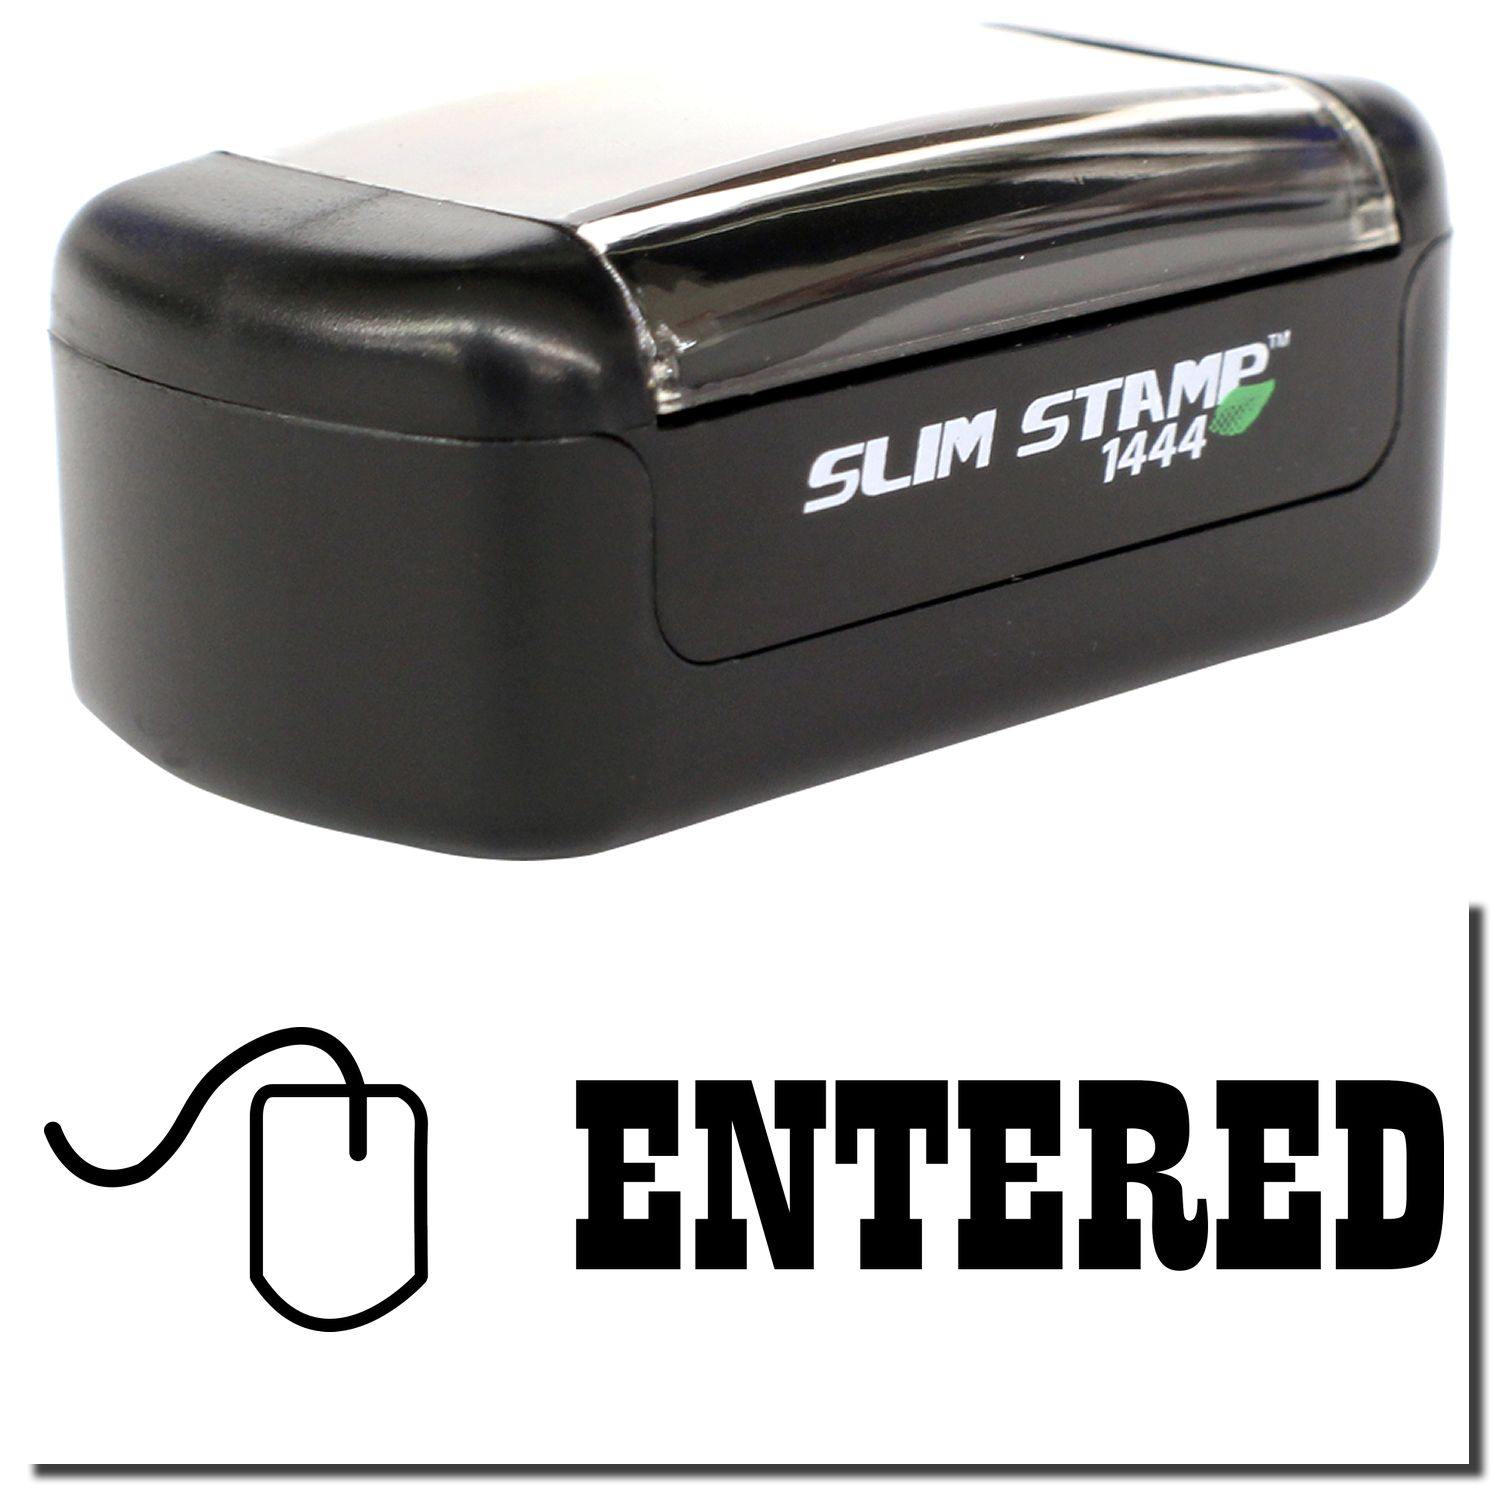 A stock office pre-inked stamp with a stamped image showing how the text "ENTERED" with a small icon of a mouse on the left side is displayed after stamping.